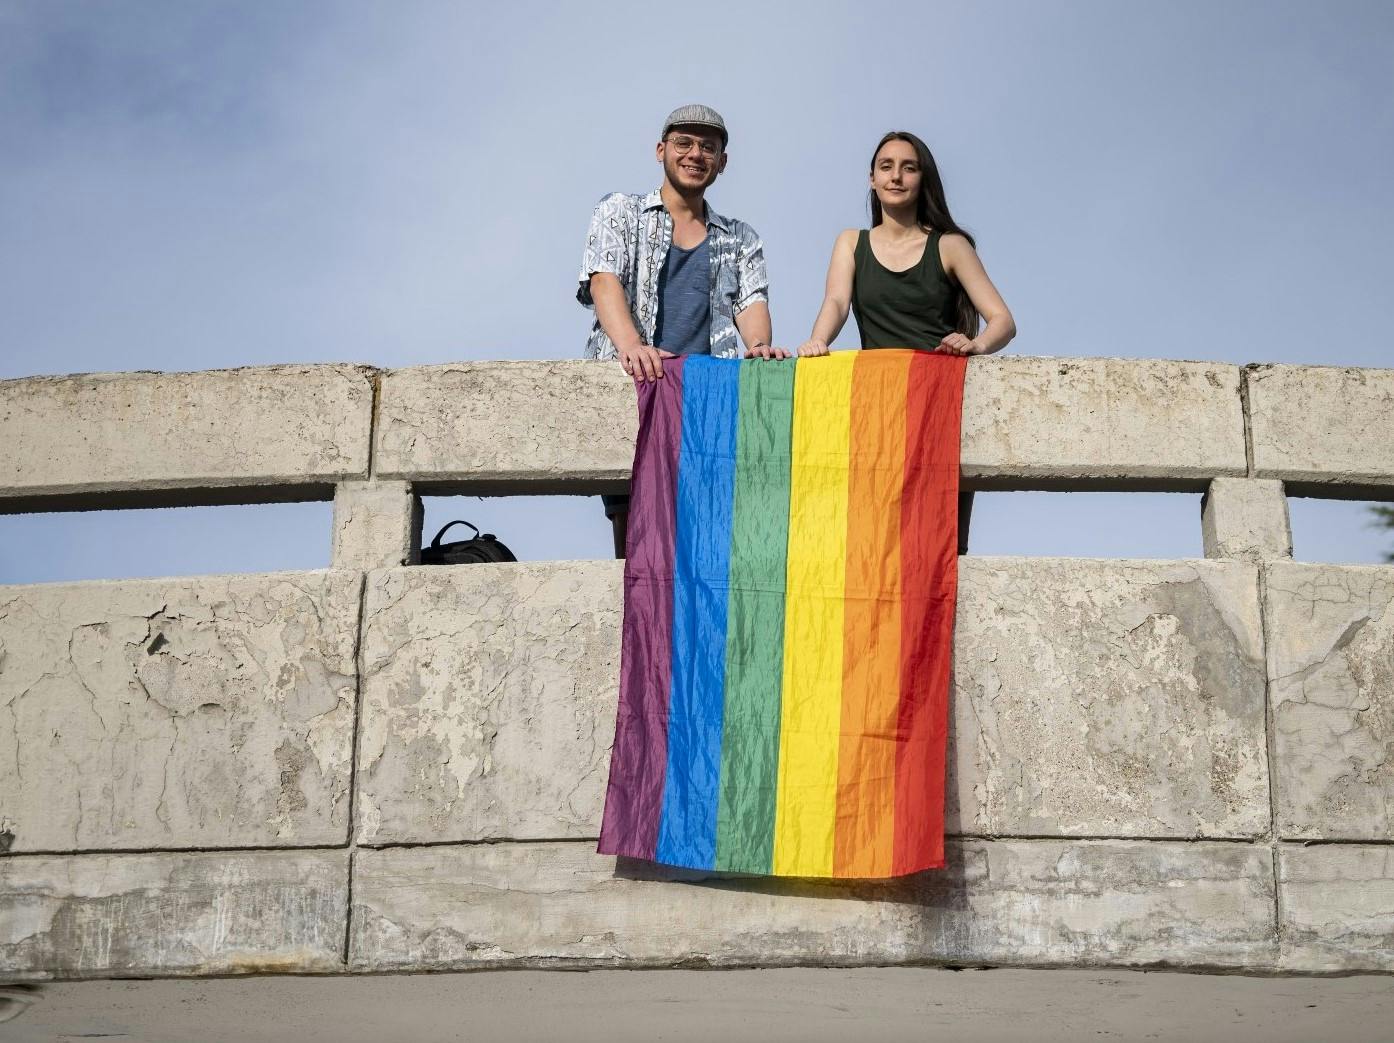 	Since May 2011, LGBTI+ students at the Ankara based Middle East Technical University (METU), like Melike Balkan and Özgür Gür, have held an annual march on campus to celebrate Pride without any restrictions. In 2018, university authorities attempted to ban the march, citing the blanket ban on all LGBTI events in the capital that had been introduced in November 2017. Their attempt was thwarted however, and the students held the march.

In May 2019, when students again attempted to hold the march, the university management called the police onto campus. The police violently broke up the gathering using pepper spray, plastic bullets and tear gas and detained 21 students and an academic. 18 of the studentsm including Melike and Özgür, and the academic are facing prosecution under the Law on Meetings and Demonstrations. If convicted, they could face a lengthy prison sentence, simply for having exercised their right to freedom of assembly.